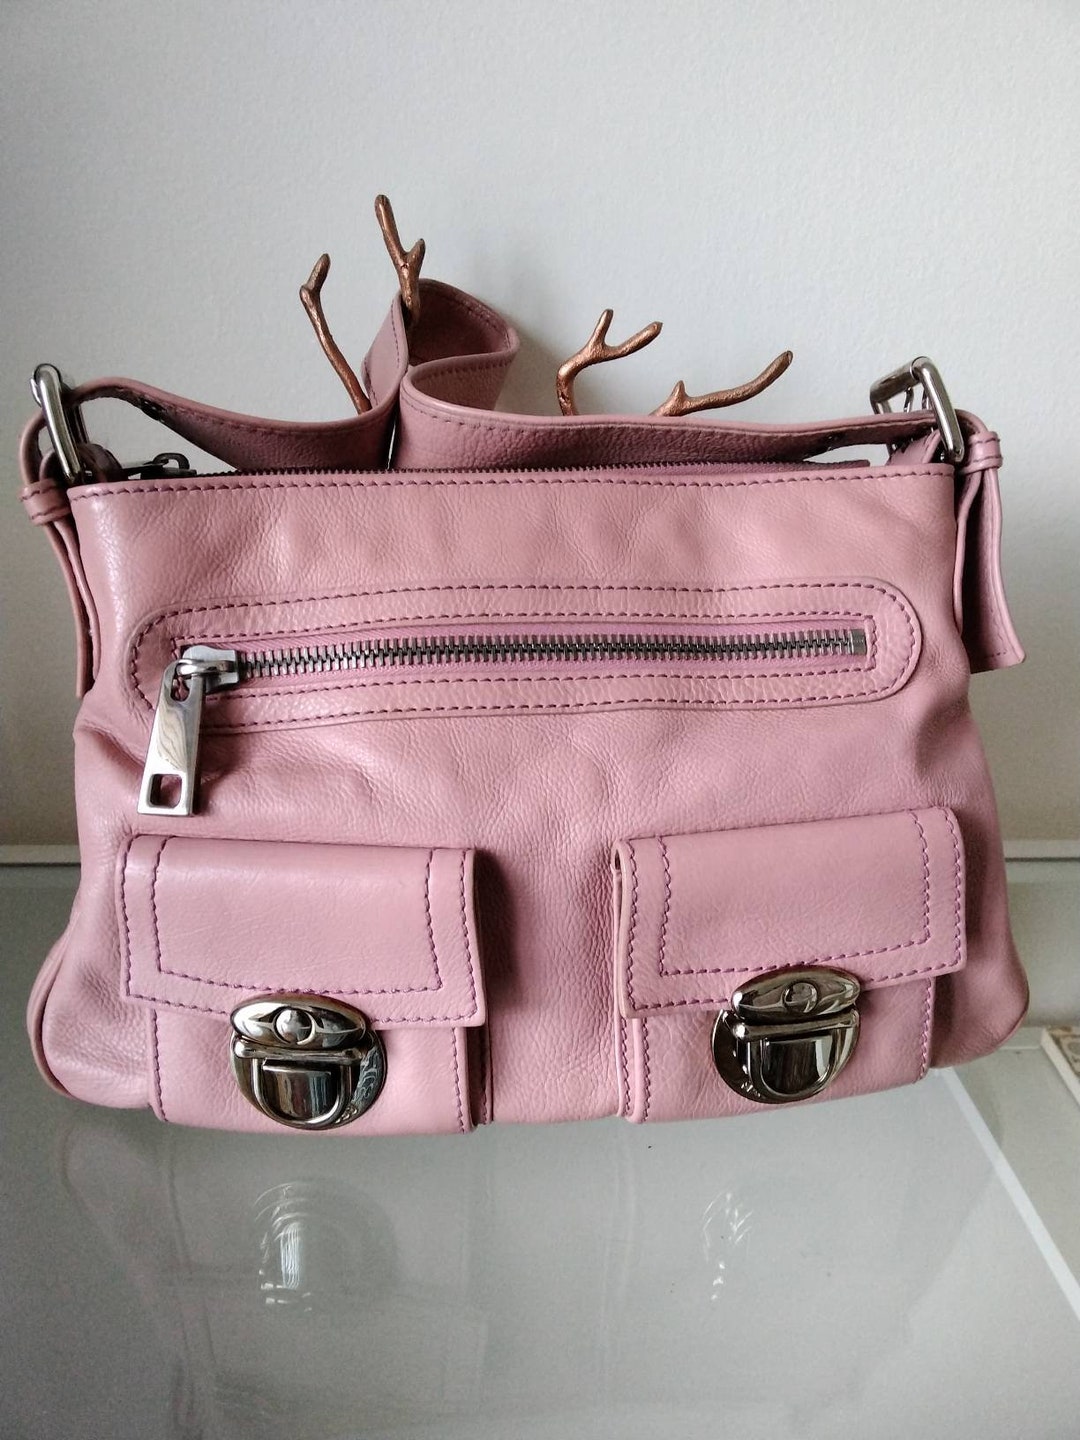 Marc Jacobs Lolly Pink All Leather Shoulder Bag Made in Italy - Etsy